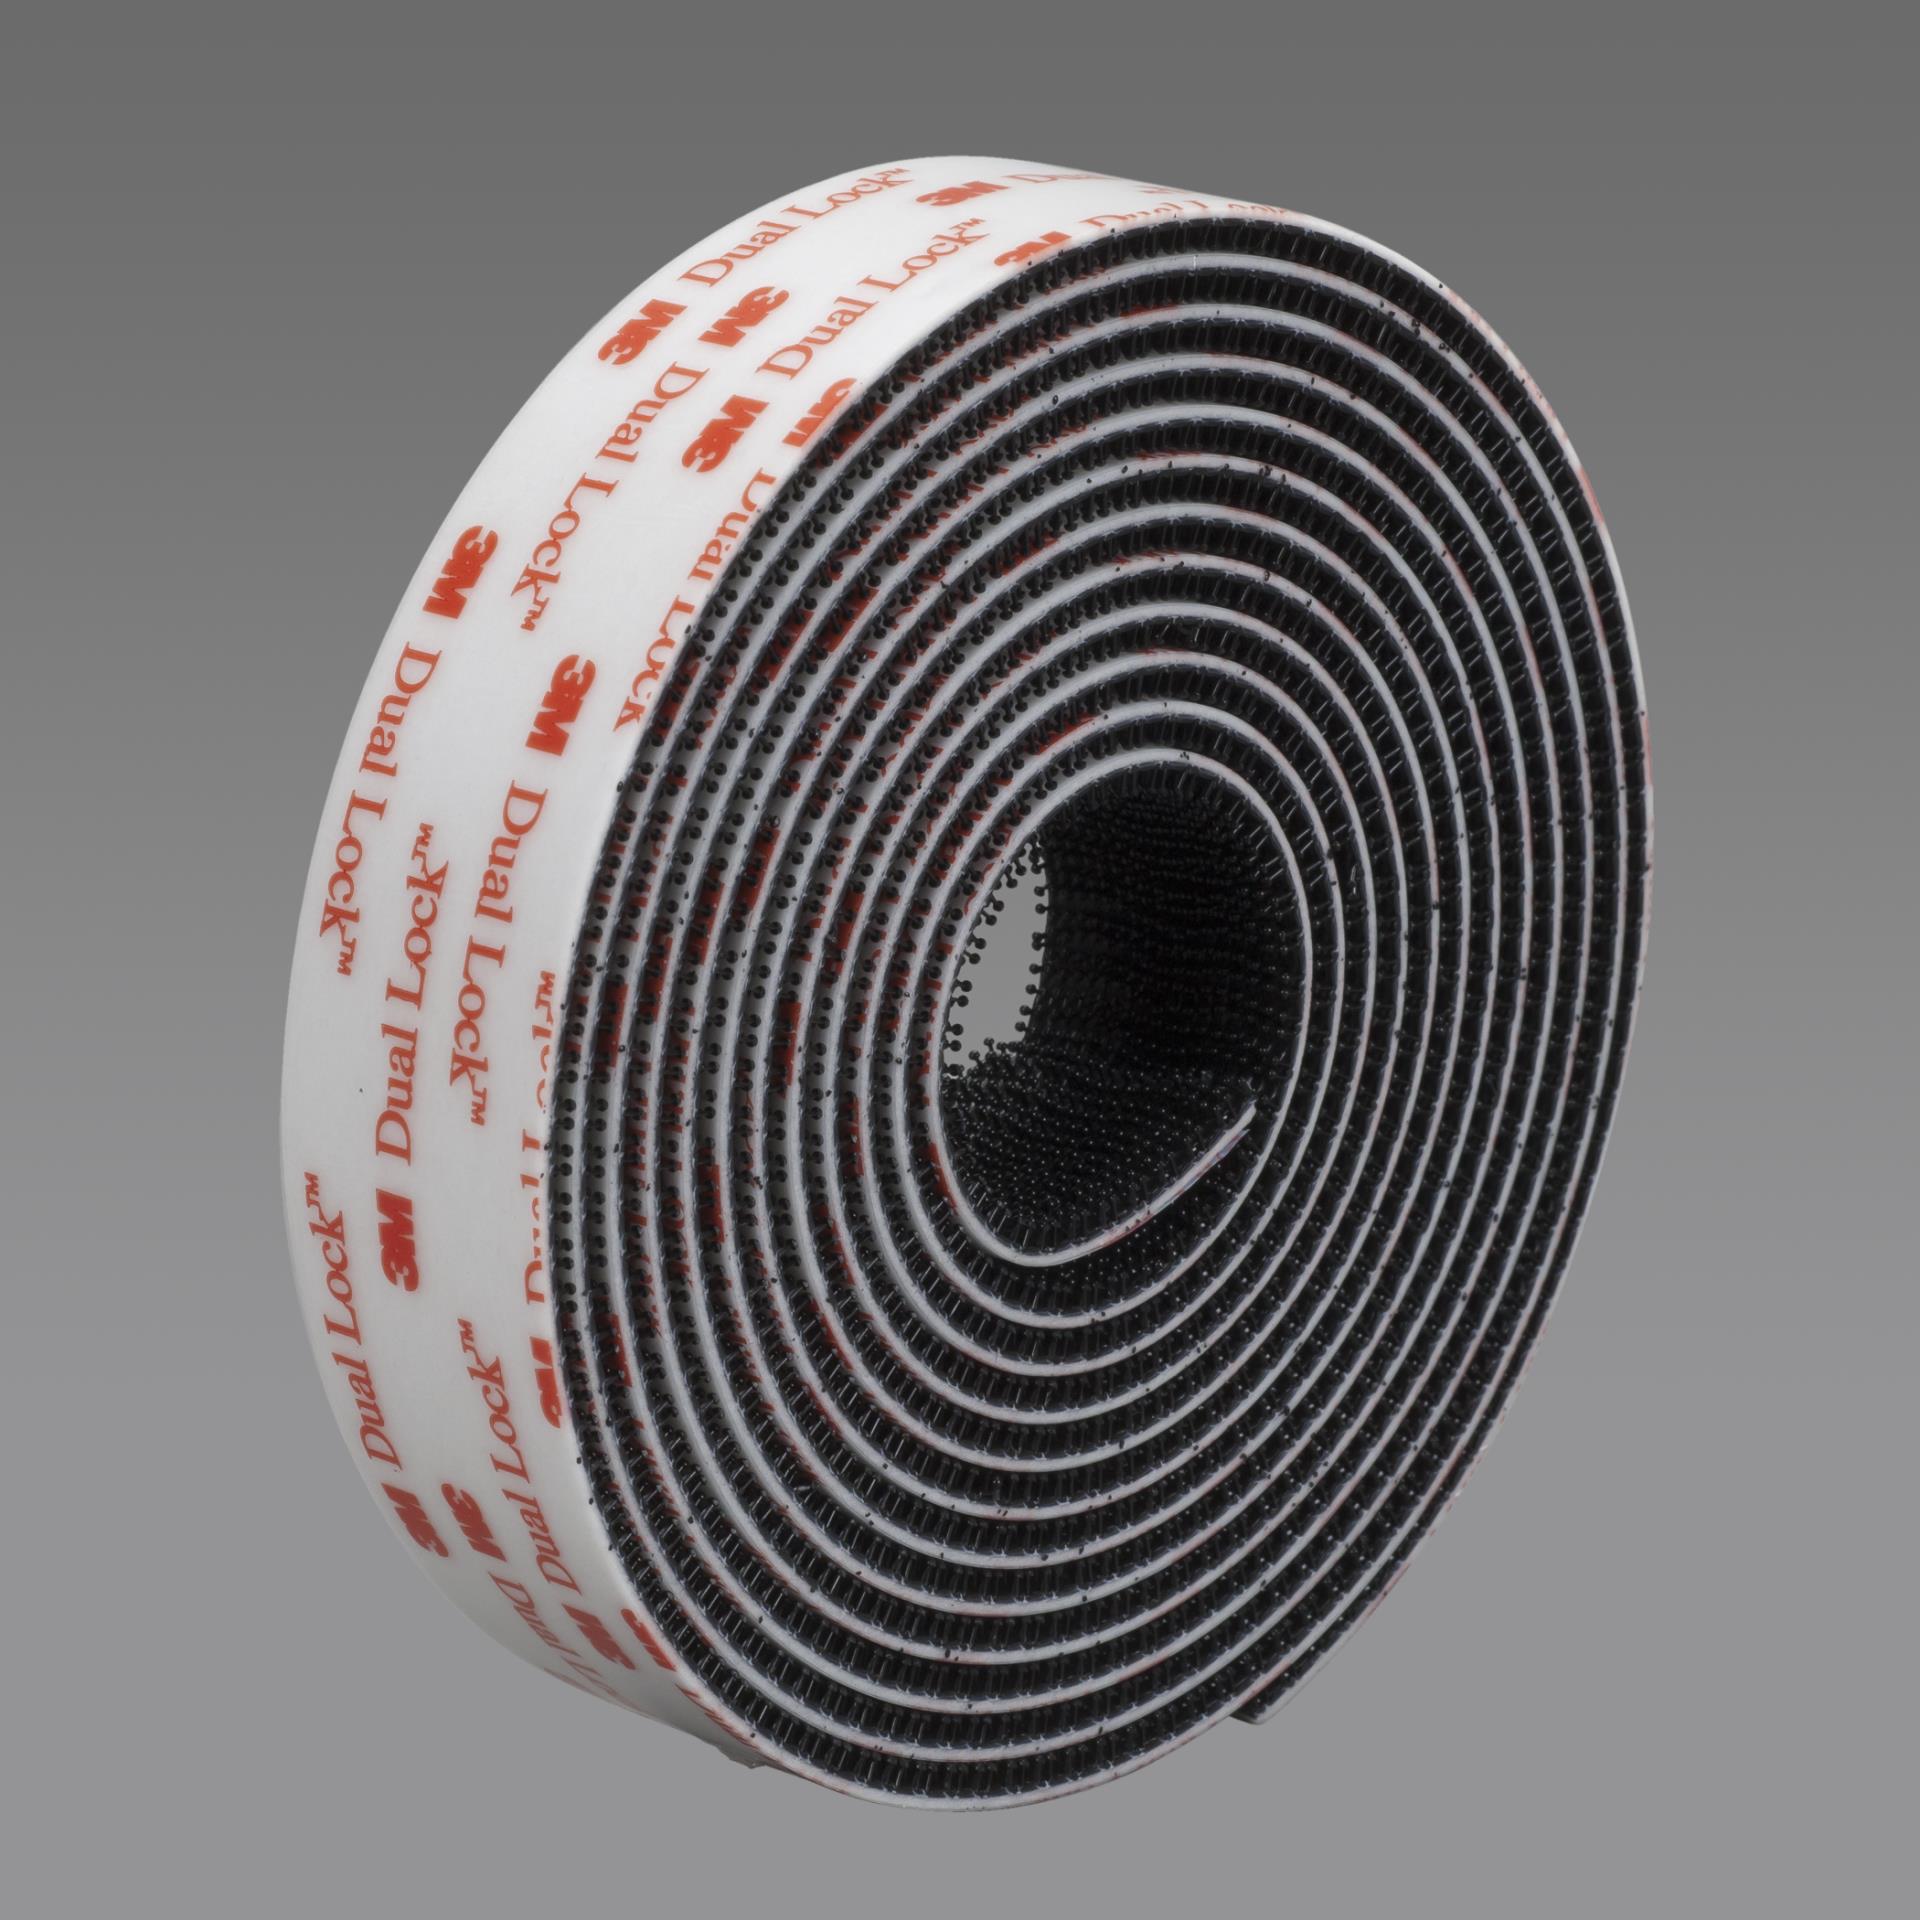 150FT Reusable .5 Roll Hook & Loop Cable Fastening Tape Cord Wraps Straps 1/2